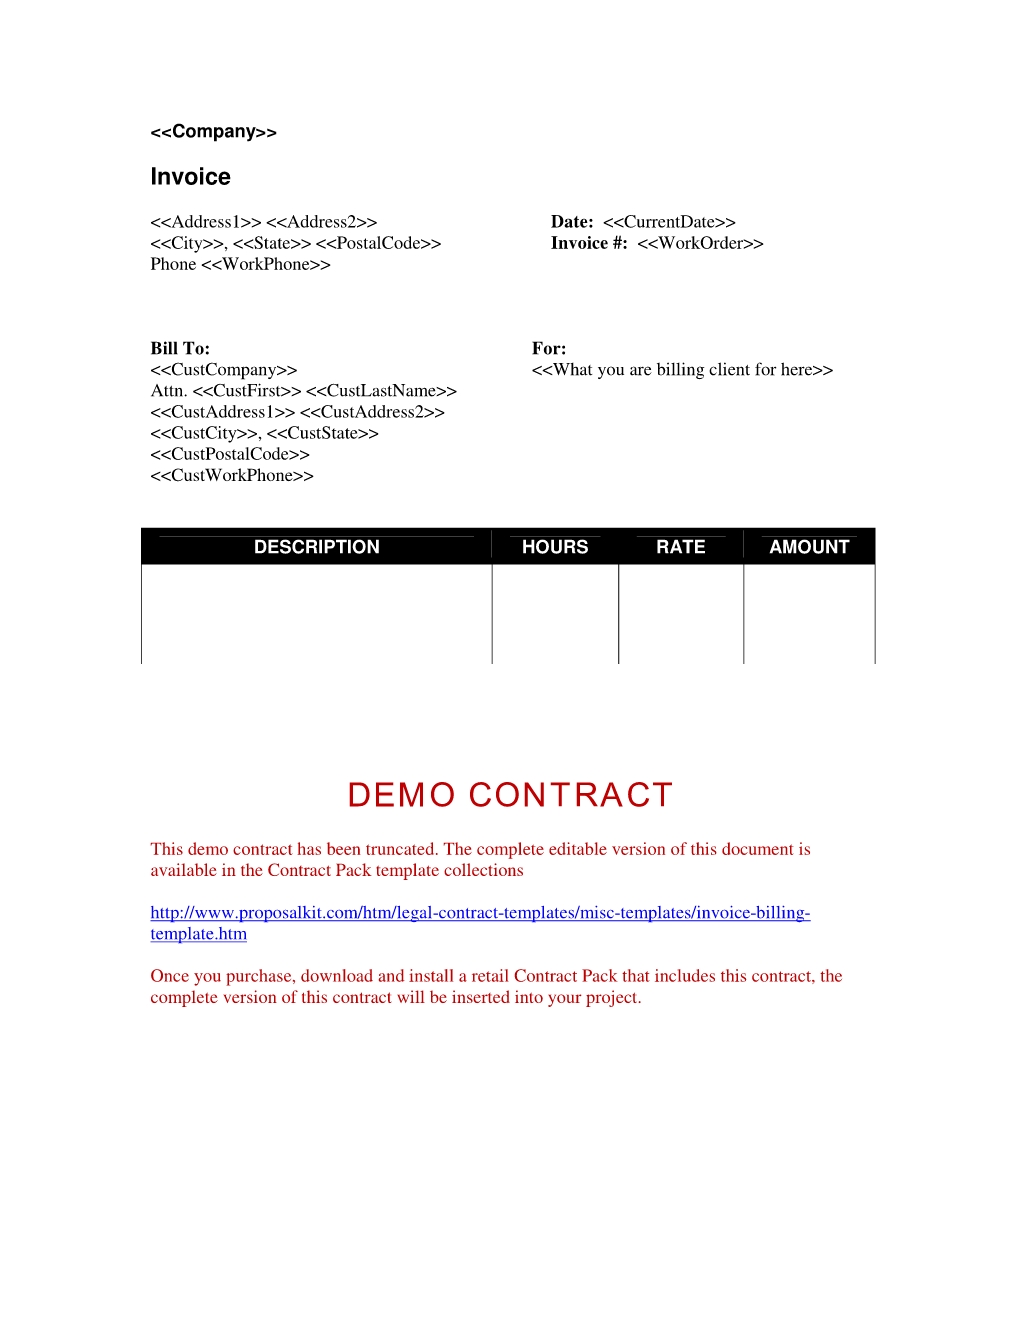 invoice billing template miscellaneous templates legal writing a invoice